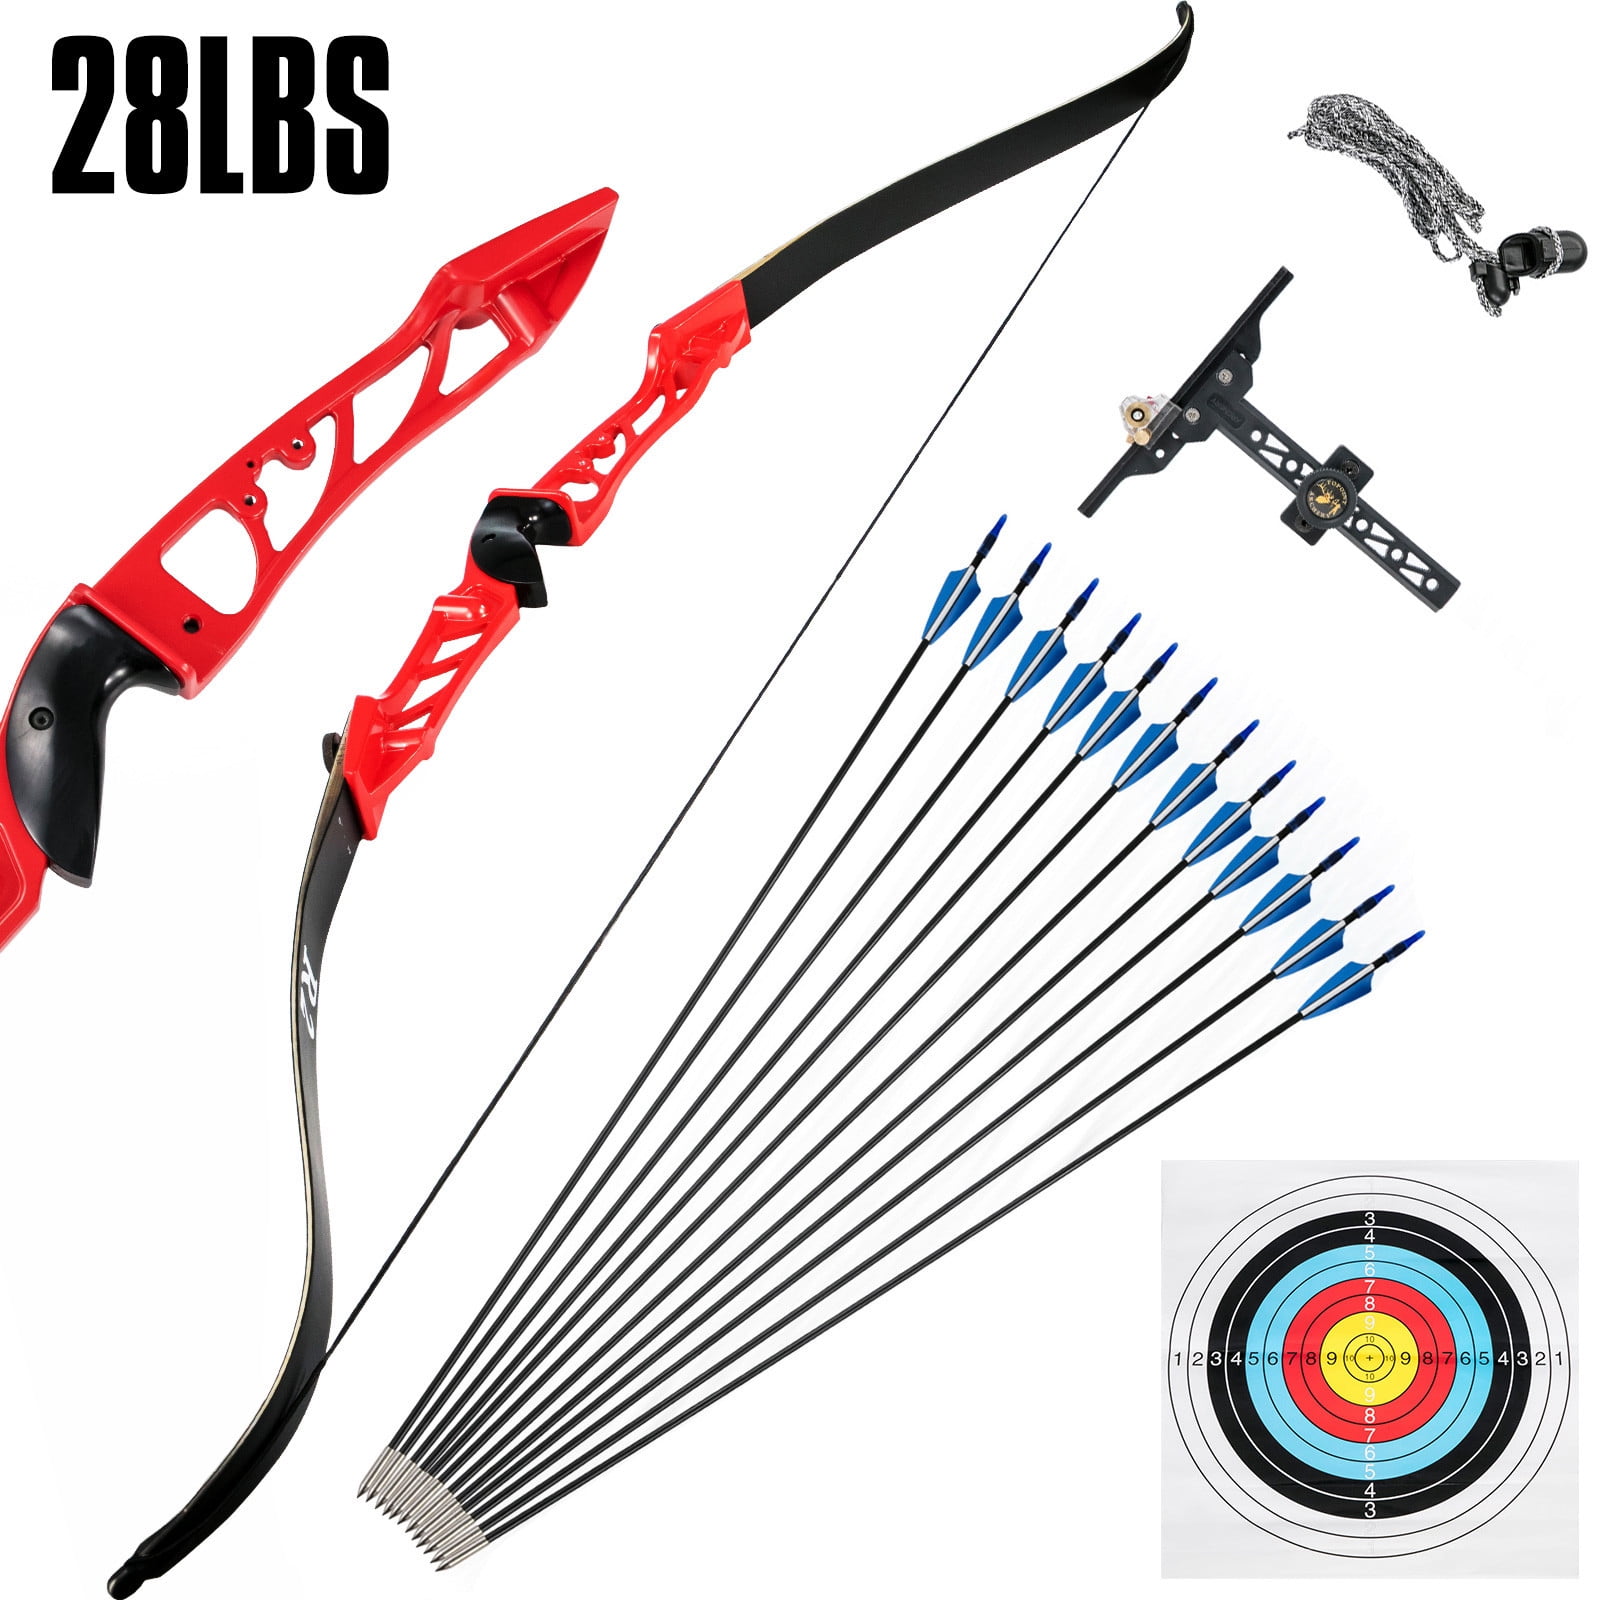 Archery 52" 30 lbs Aluminum Alloy Takedown Recurve Bow Hunting Shooting Practice